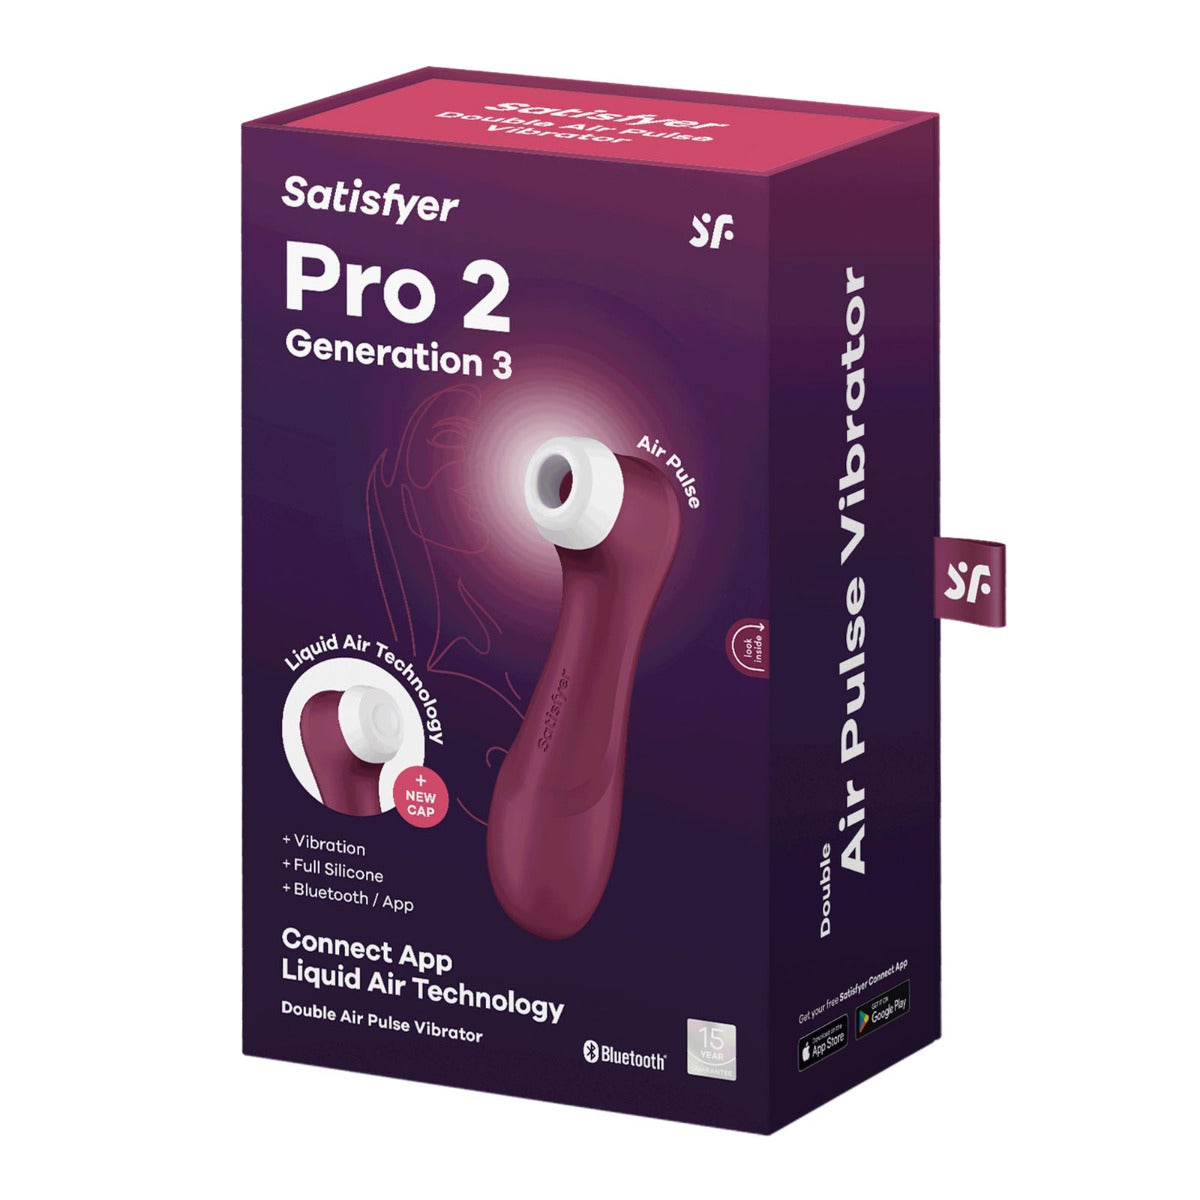 Satisfyer Pro 2 Generation 3 Liquid Air Technology With Connect App Double Air Pulse Vibrator Red